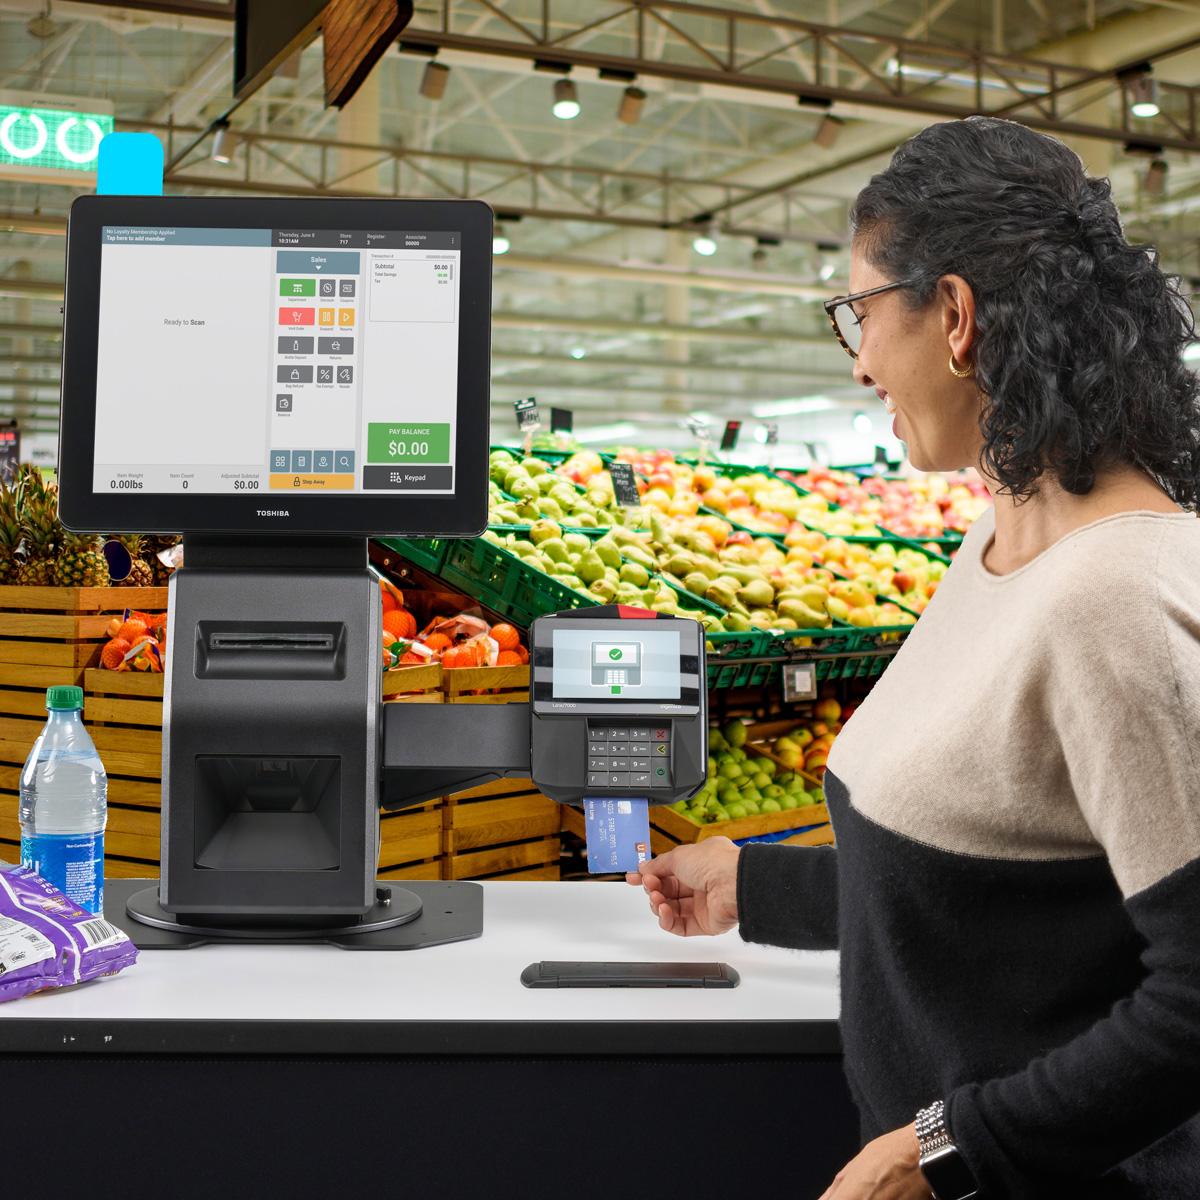 PriceSmart Announces Joint Technology Platform Project with Toshiba Global  Commerce Solutions